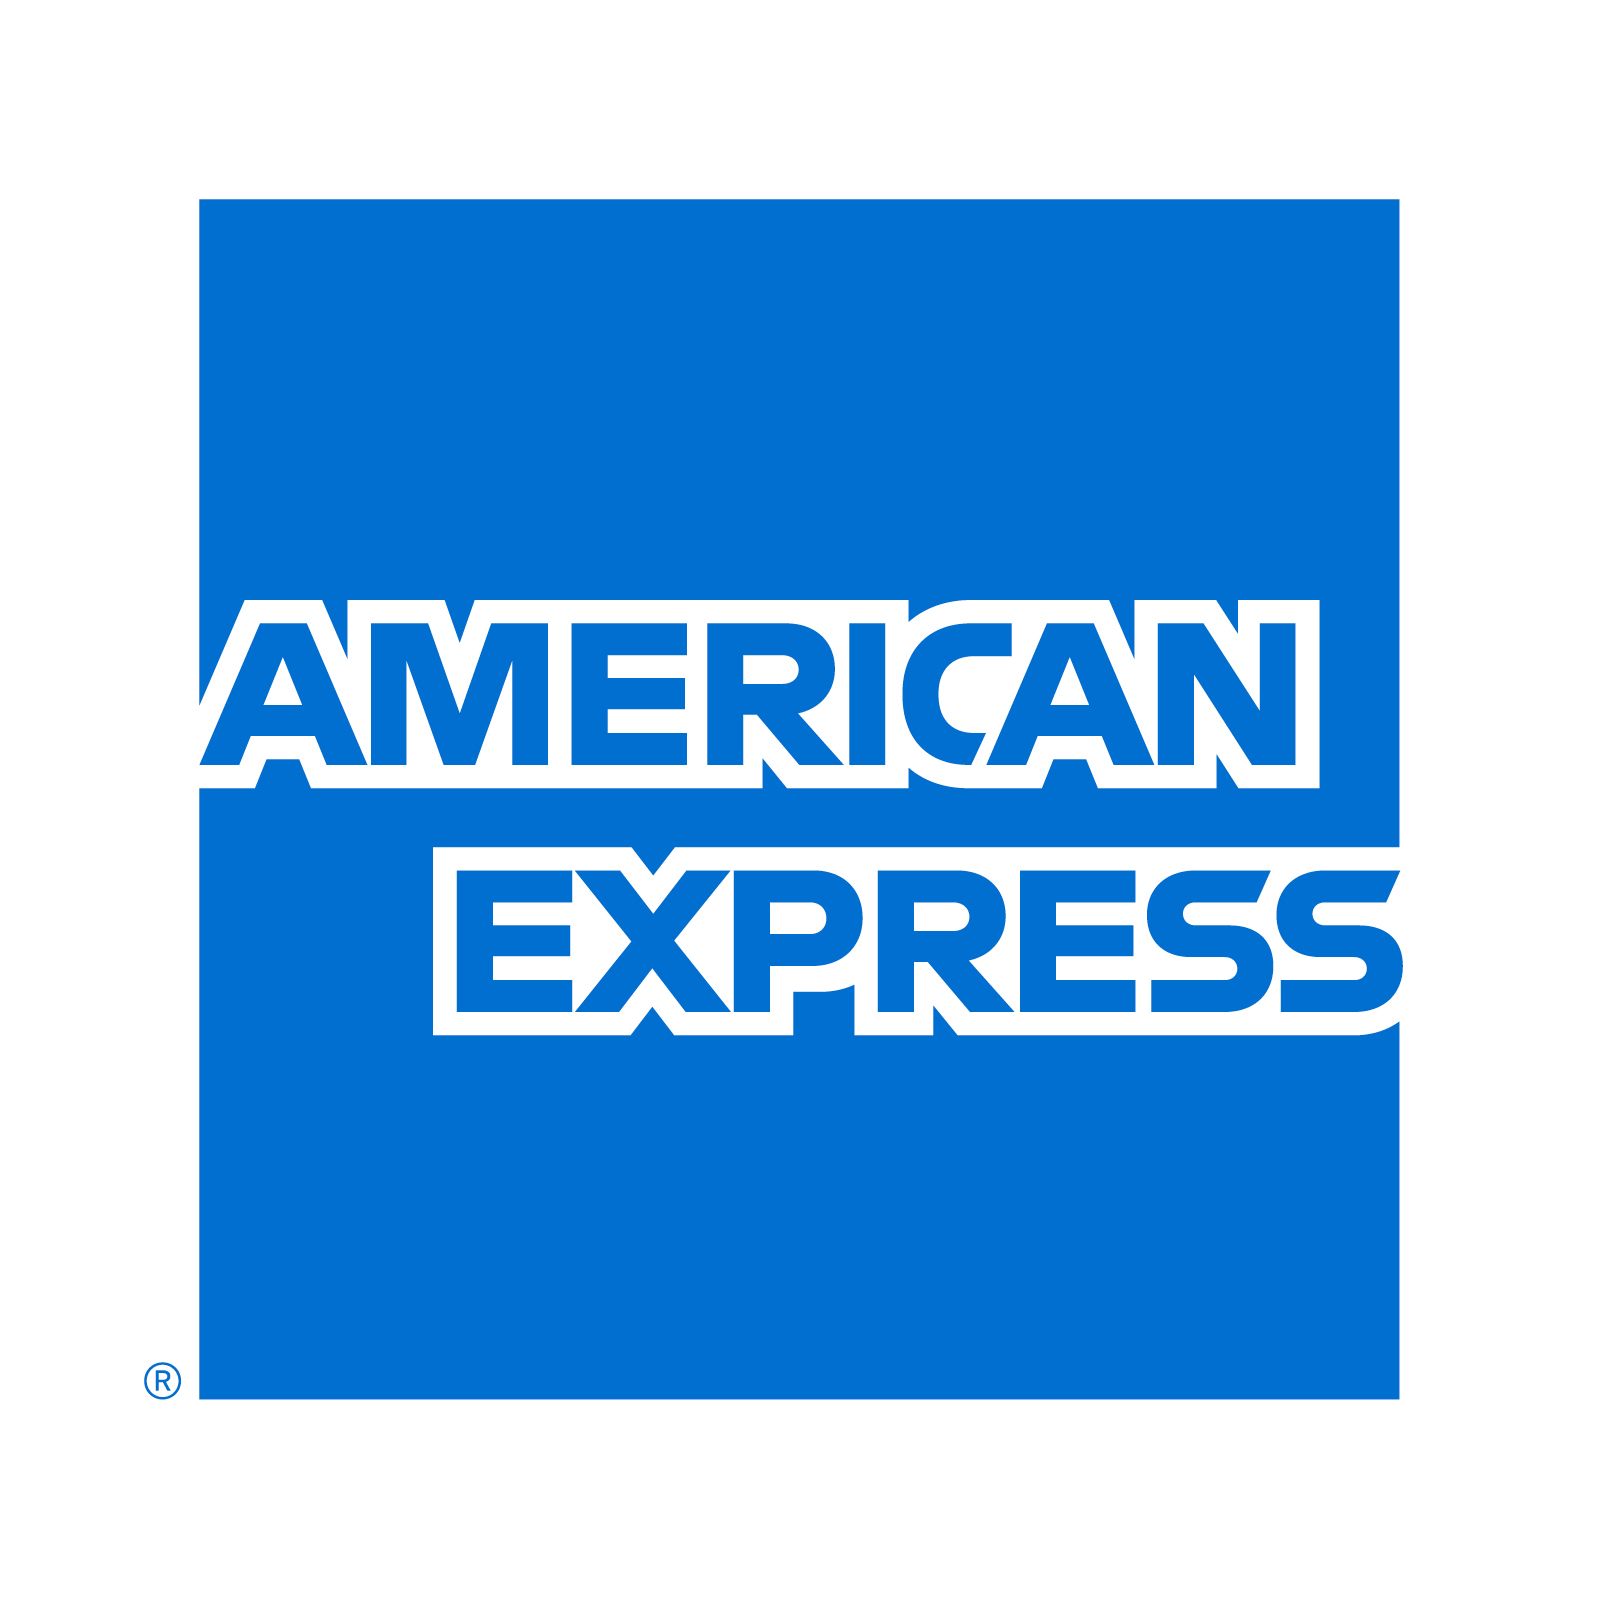 American Express Services Europe Ltd.